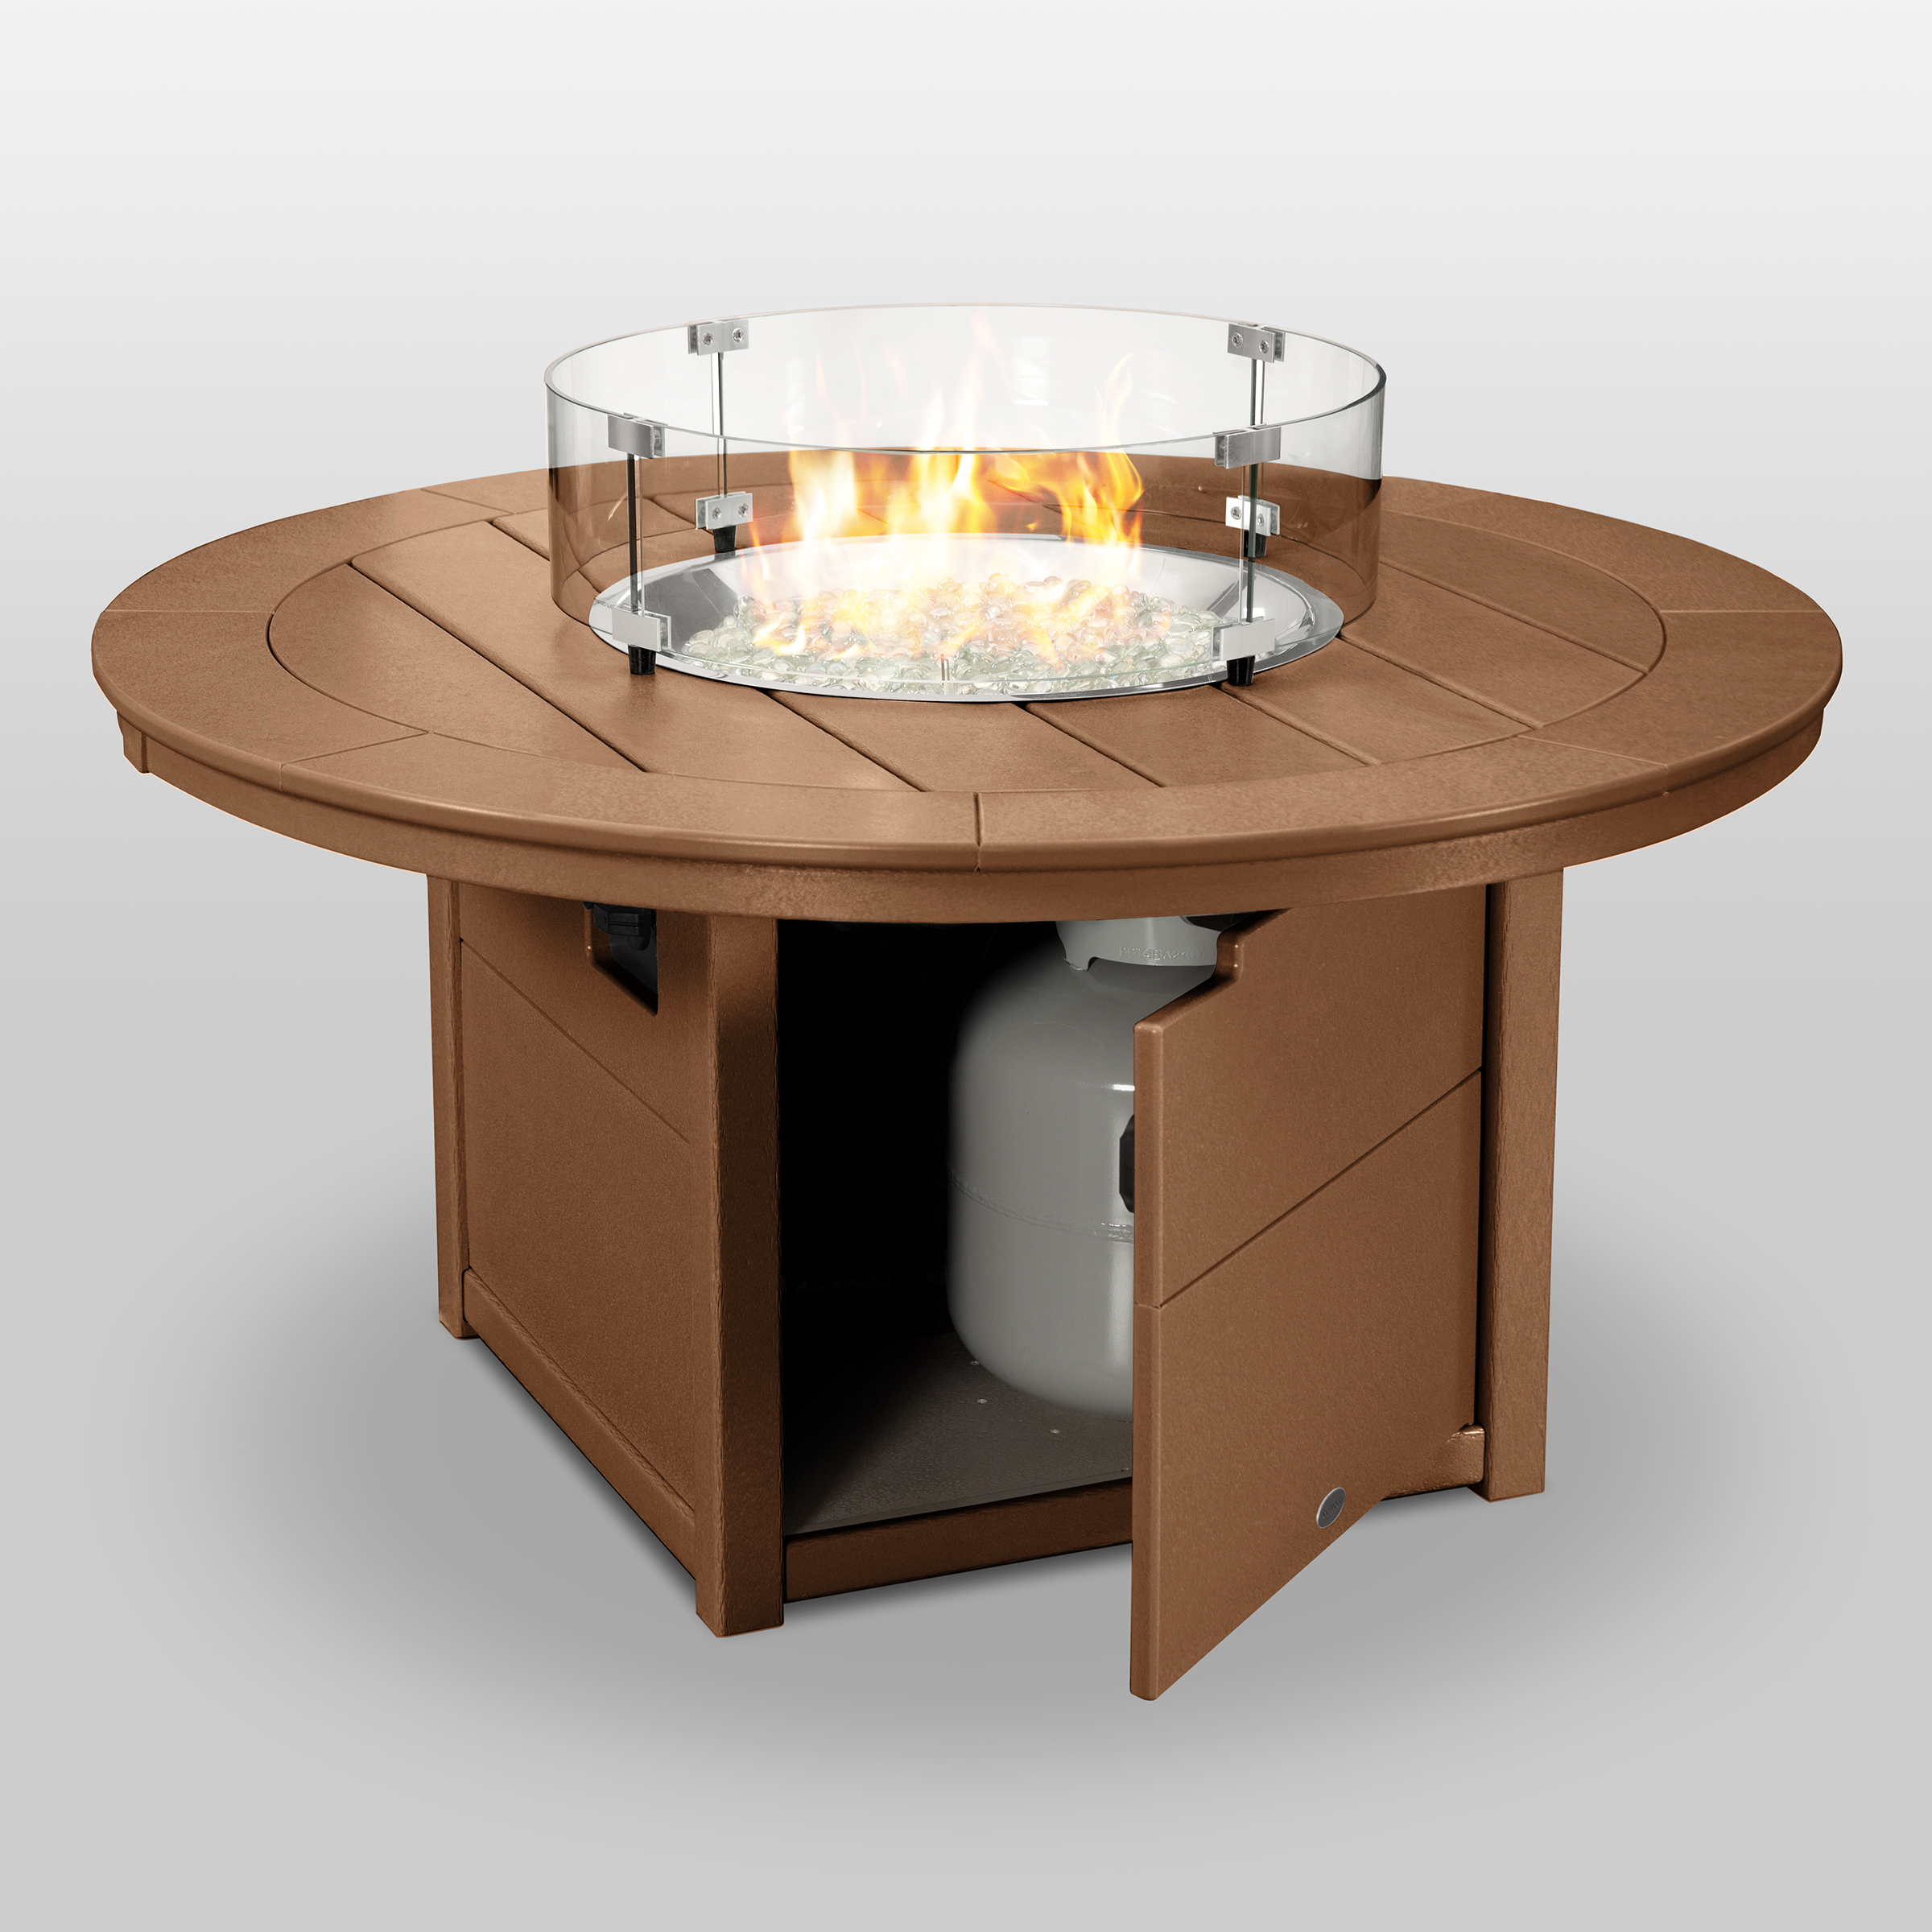 Round 48 Inch Fire Pit Table In Teak, 48 Inch Fire Pit